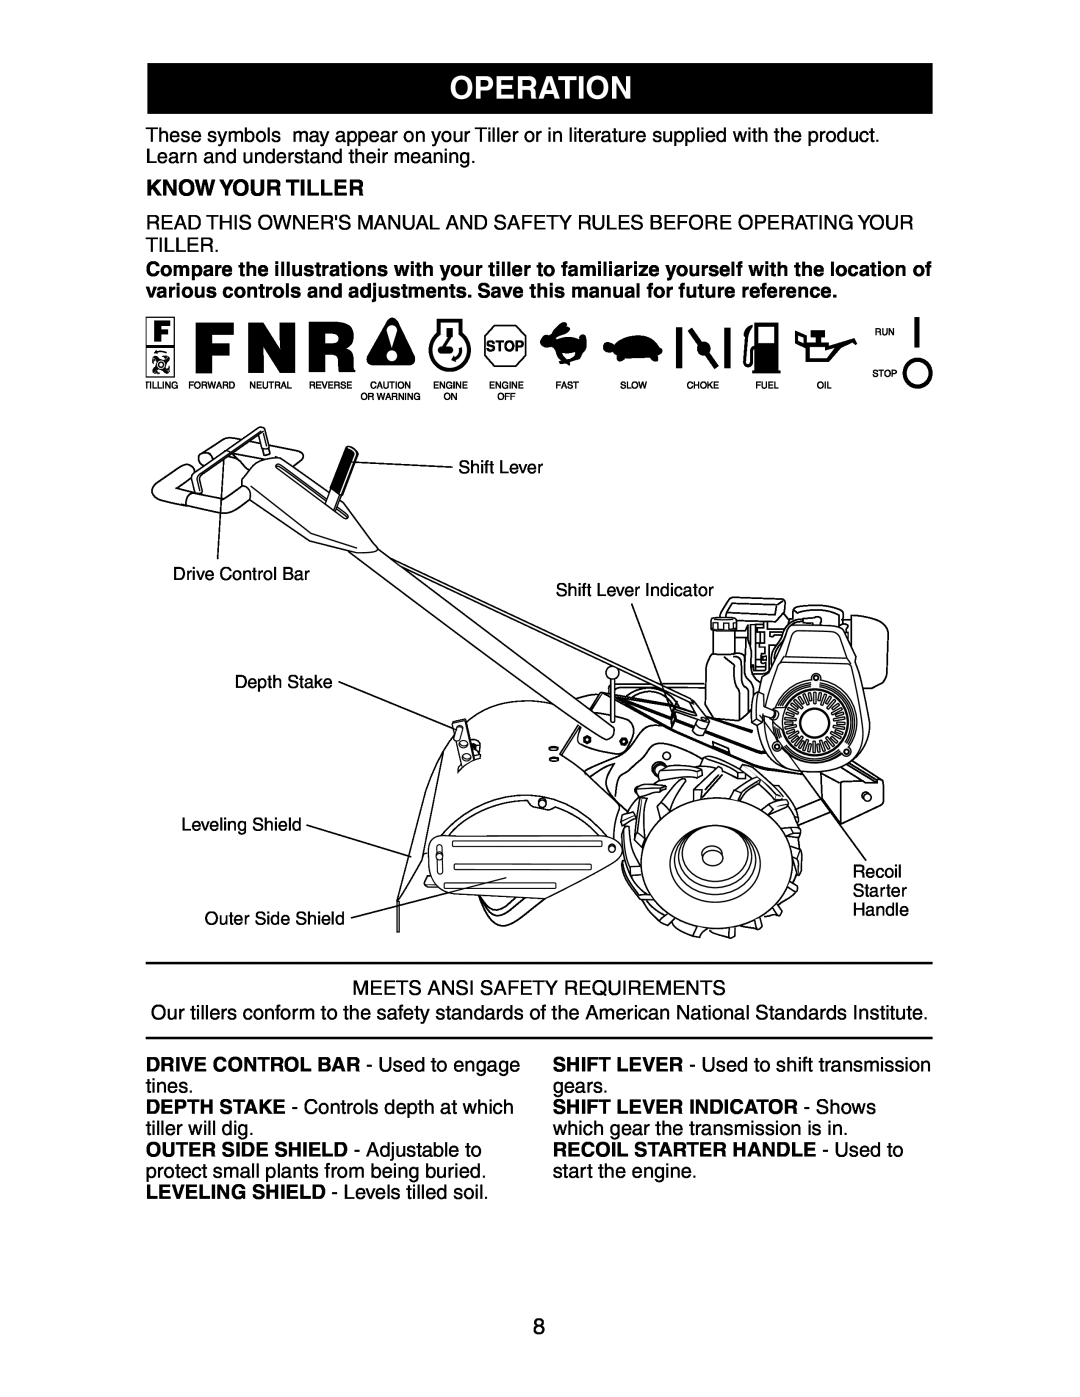 Sears 917.29425 owner manual Operation, Know Your Tiller 